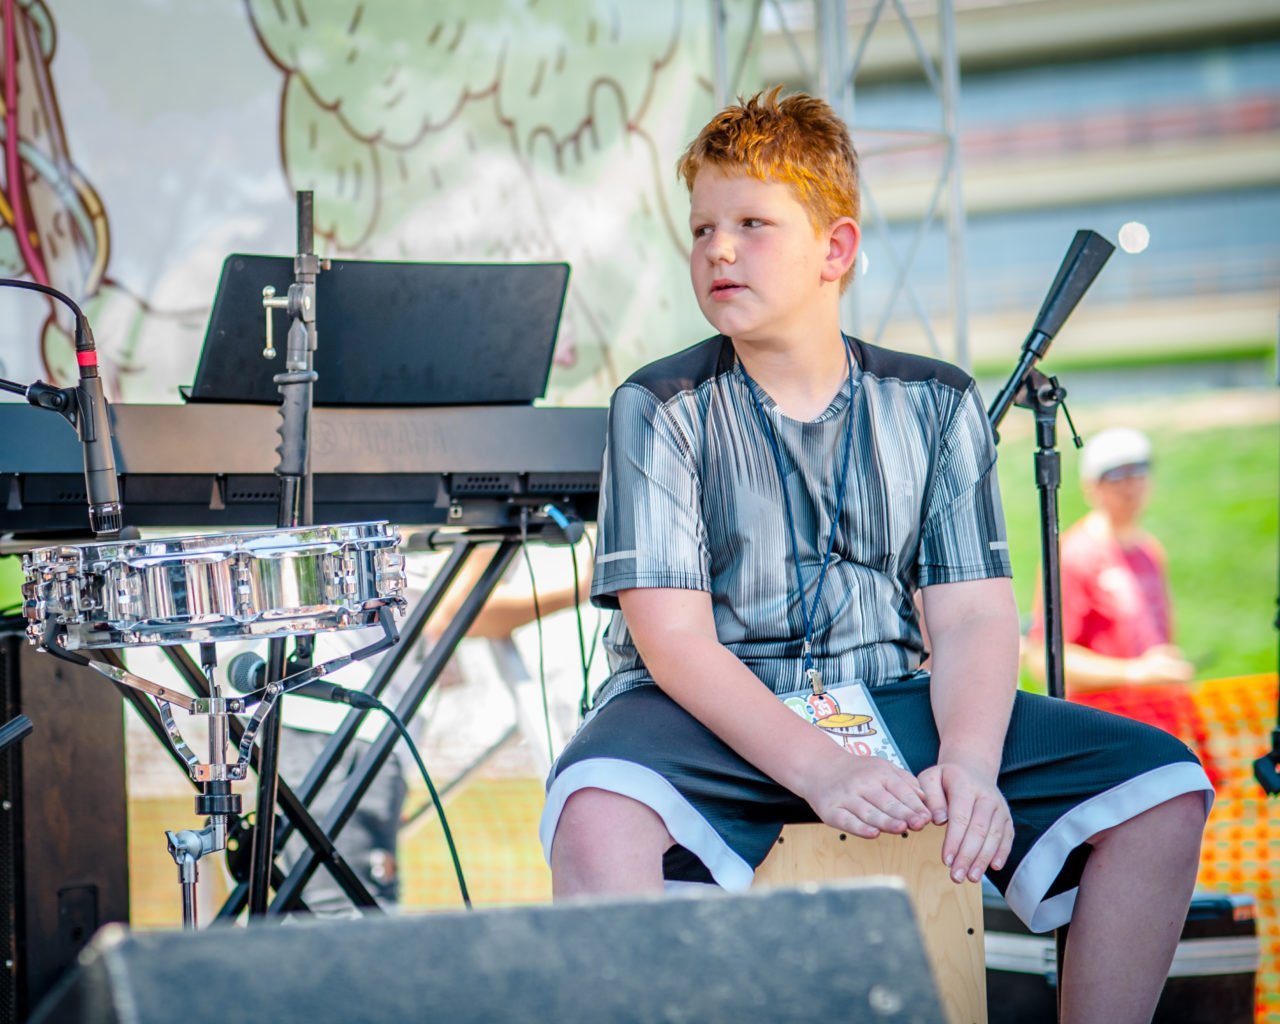 Summer Camp Rock performing at 80/35 Music Festival 2018 in Des Moines, Iowa